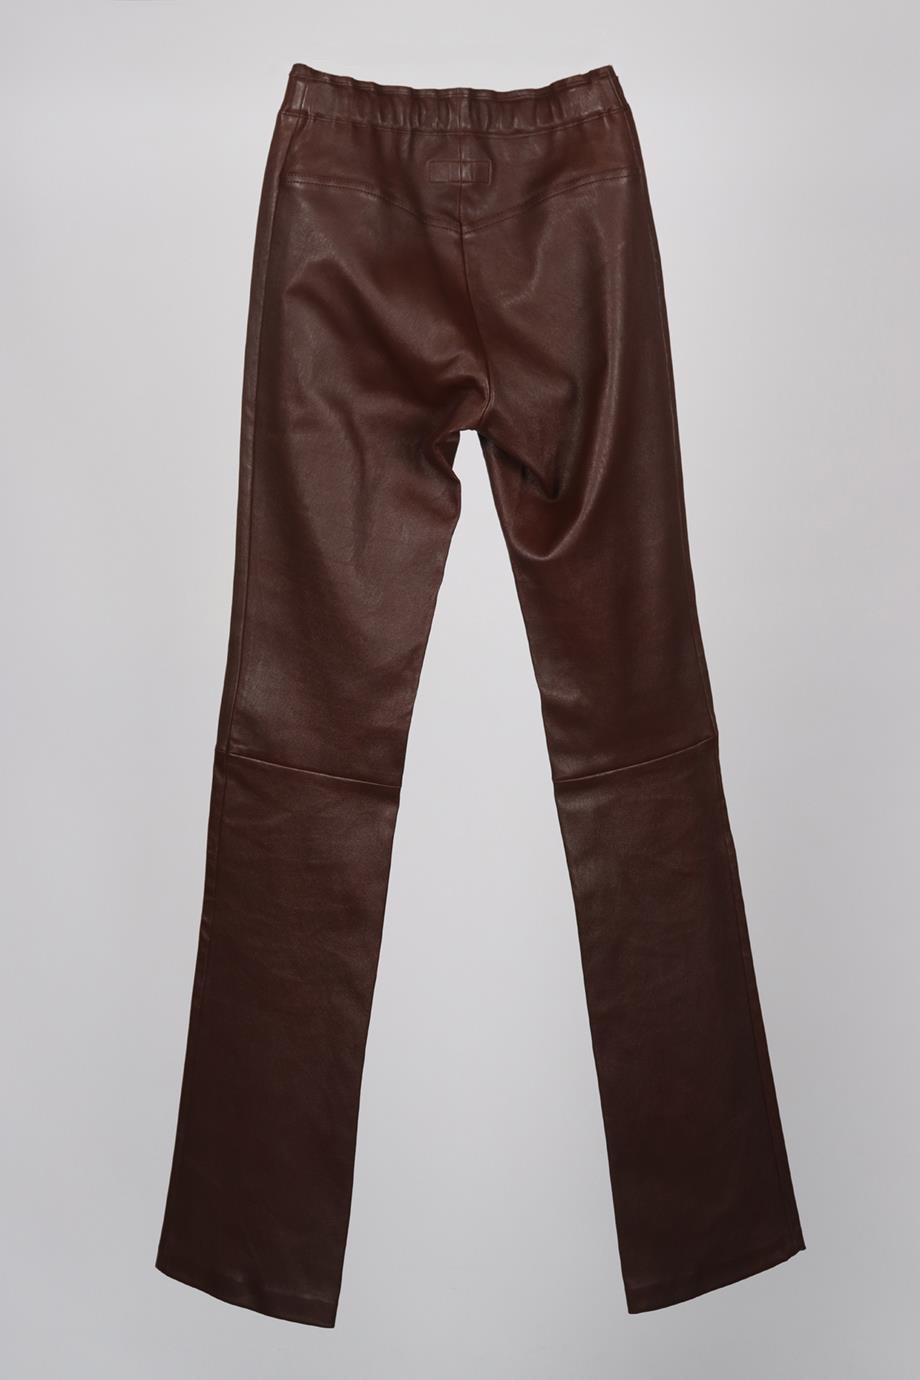 STOULS STRETCH LEATHER FLARED PANTS XSMALL